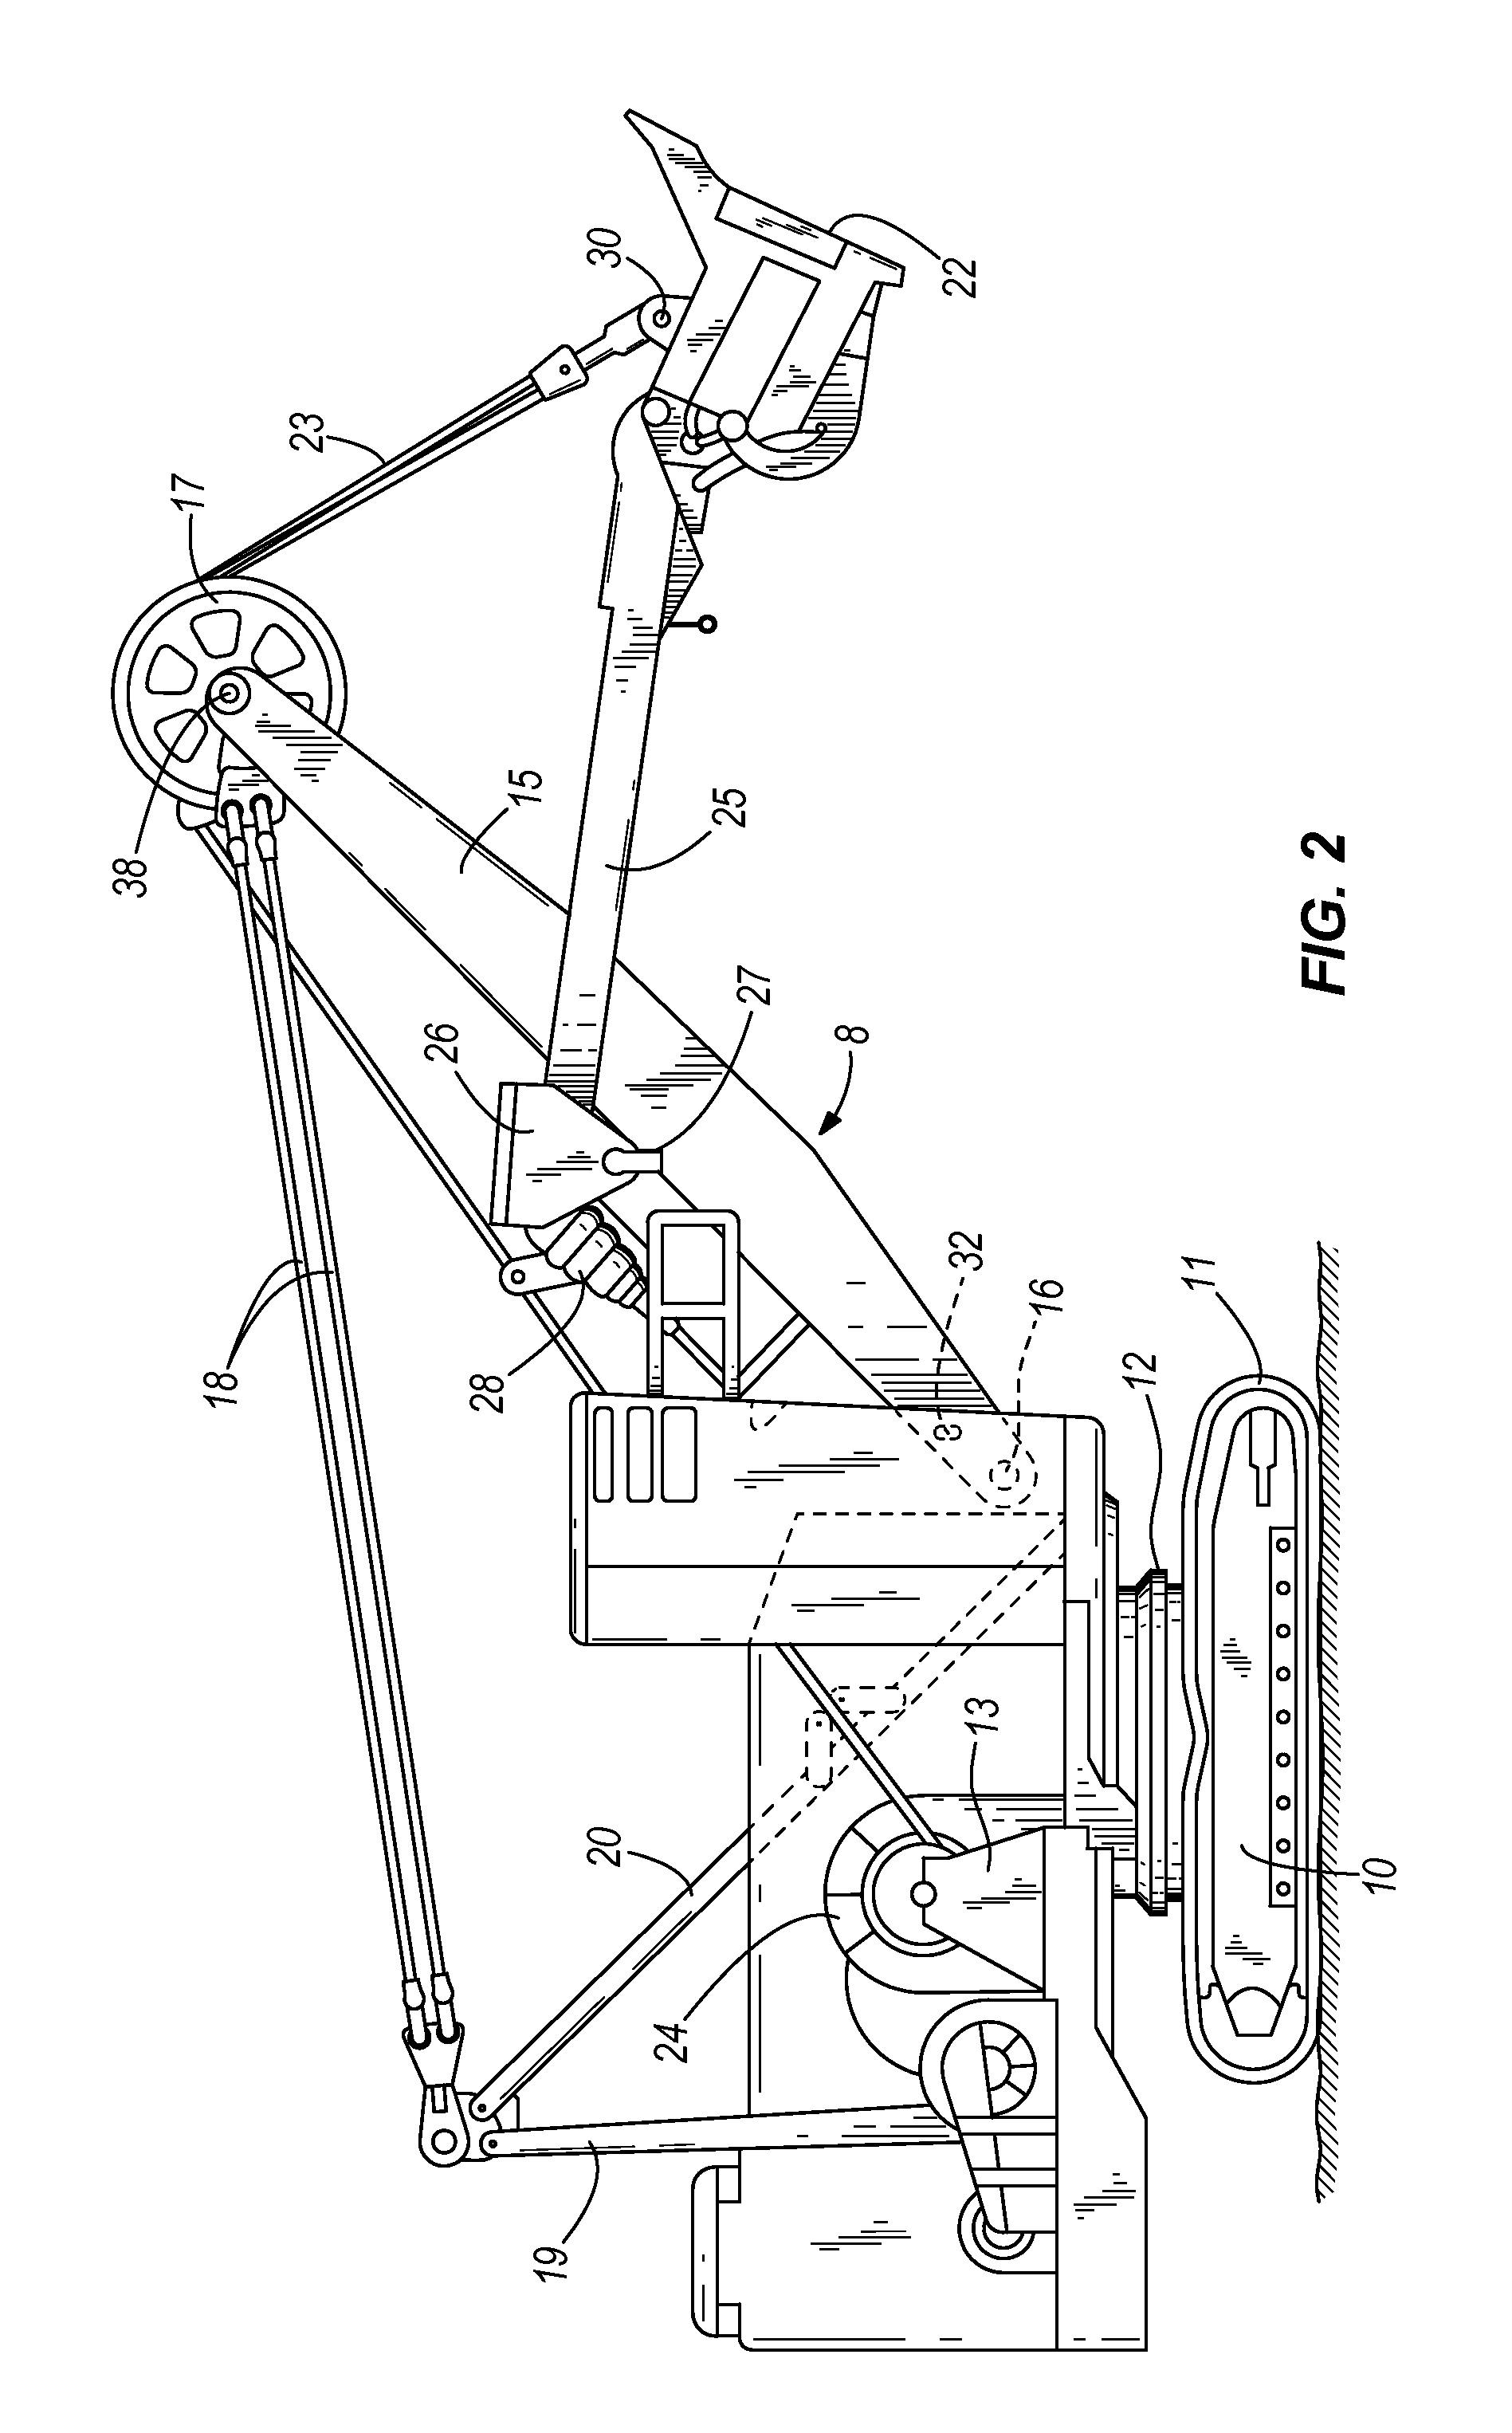 Device for measuring a load at the end of a rope wrapped over a rod